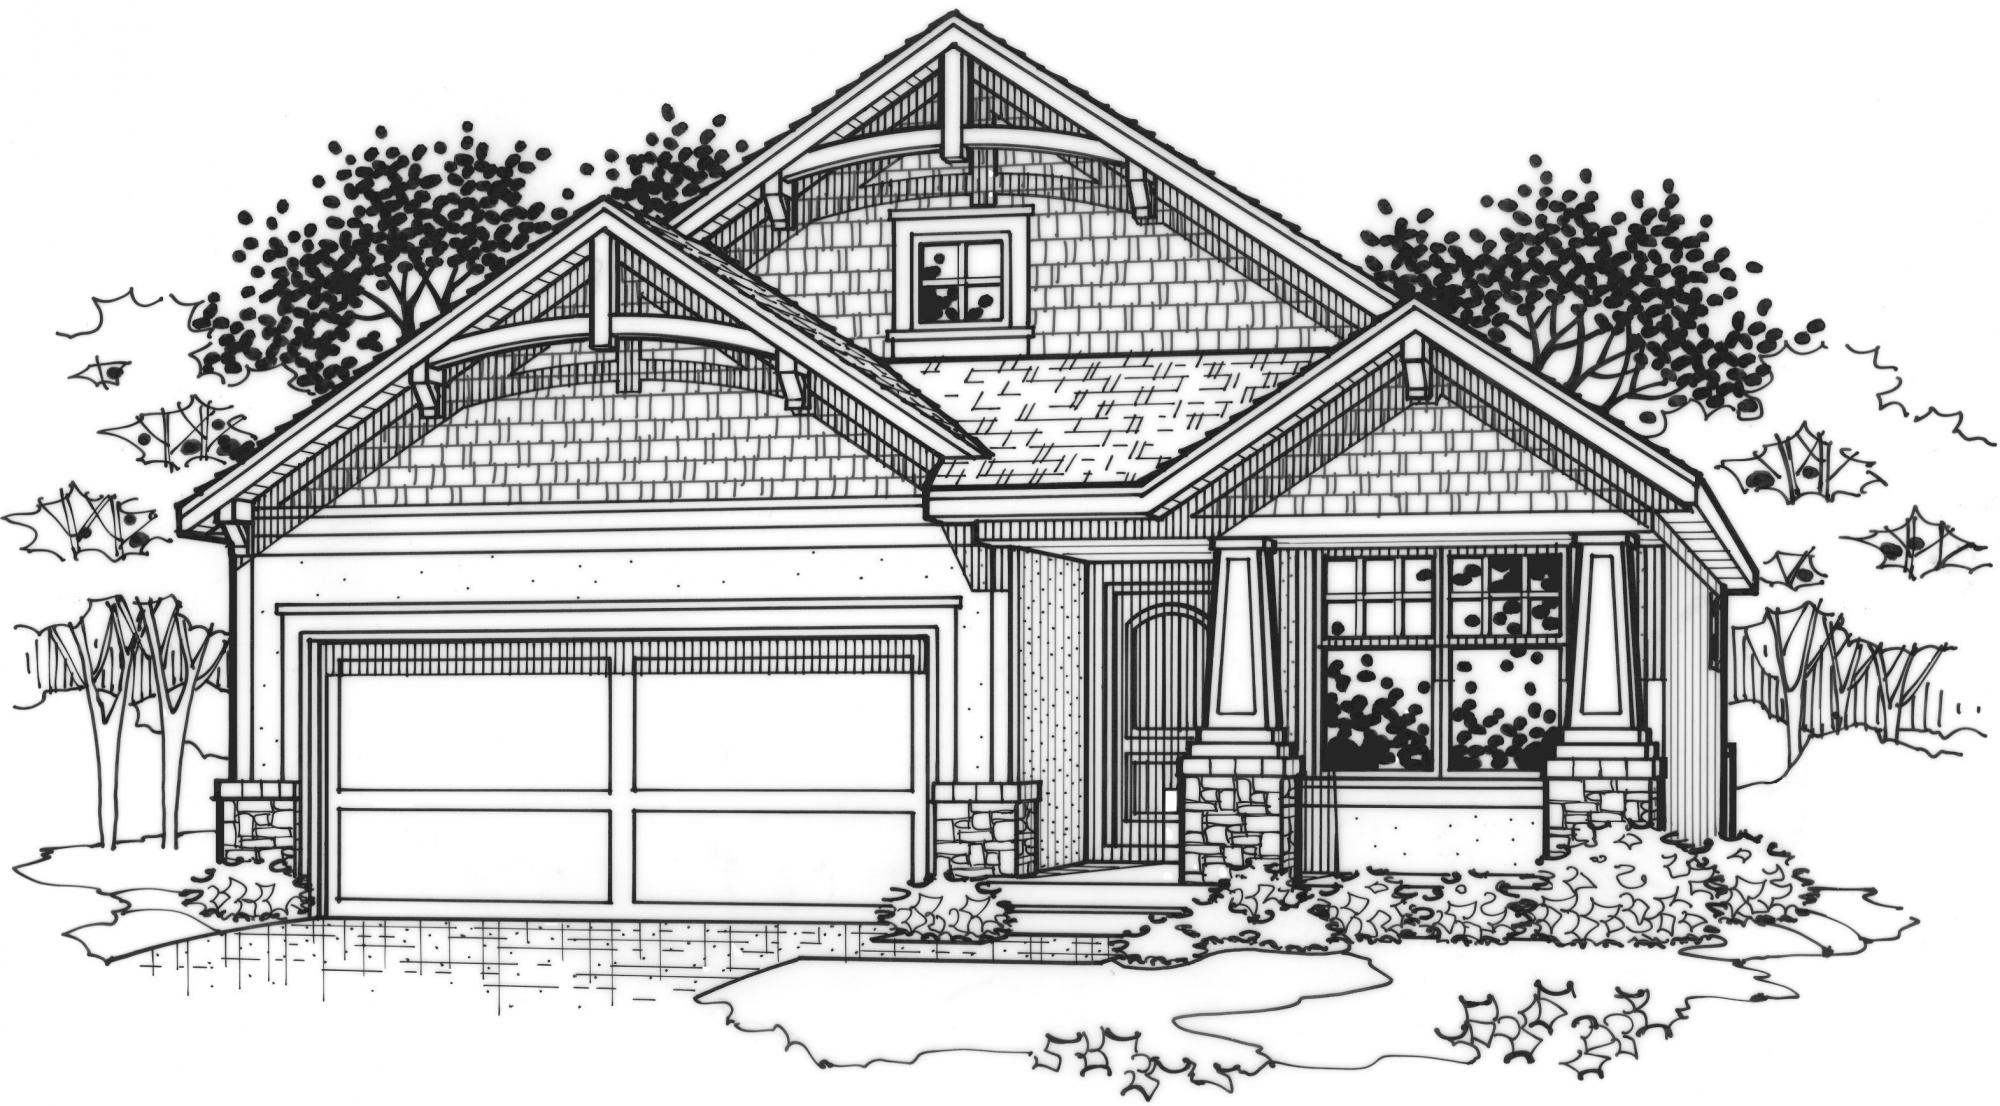 black and white rendering of a pine model from Lambie custom homes